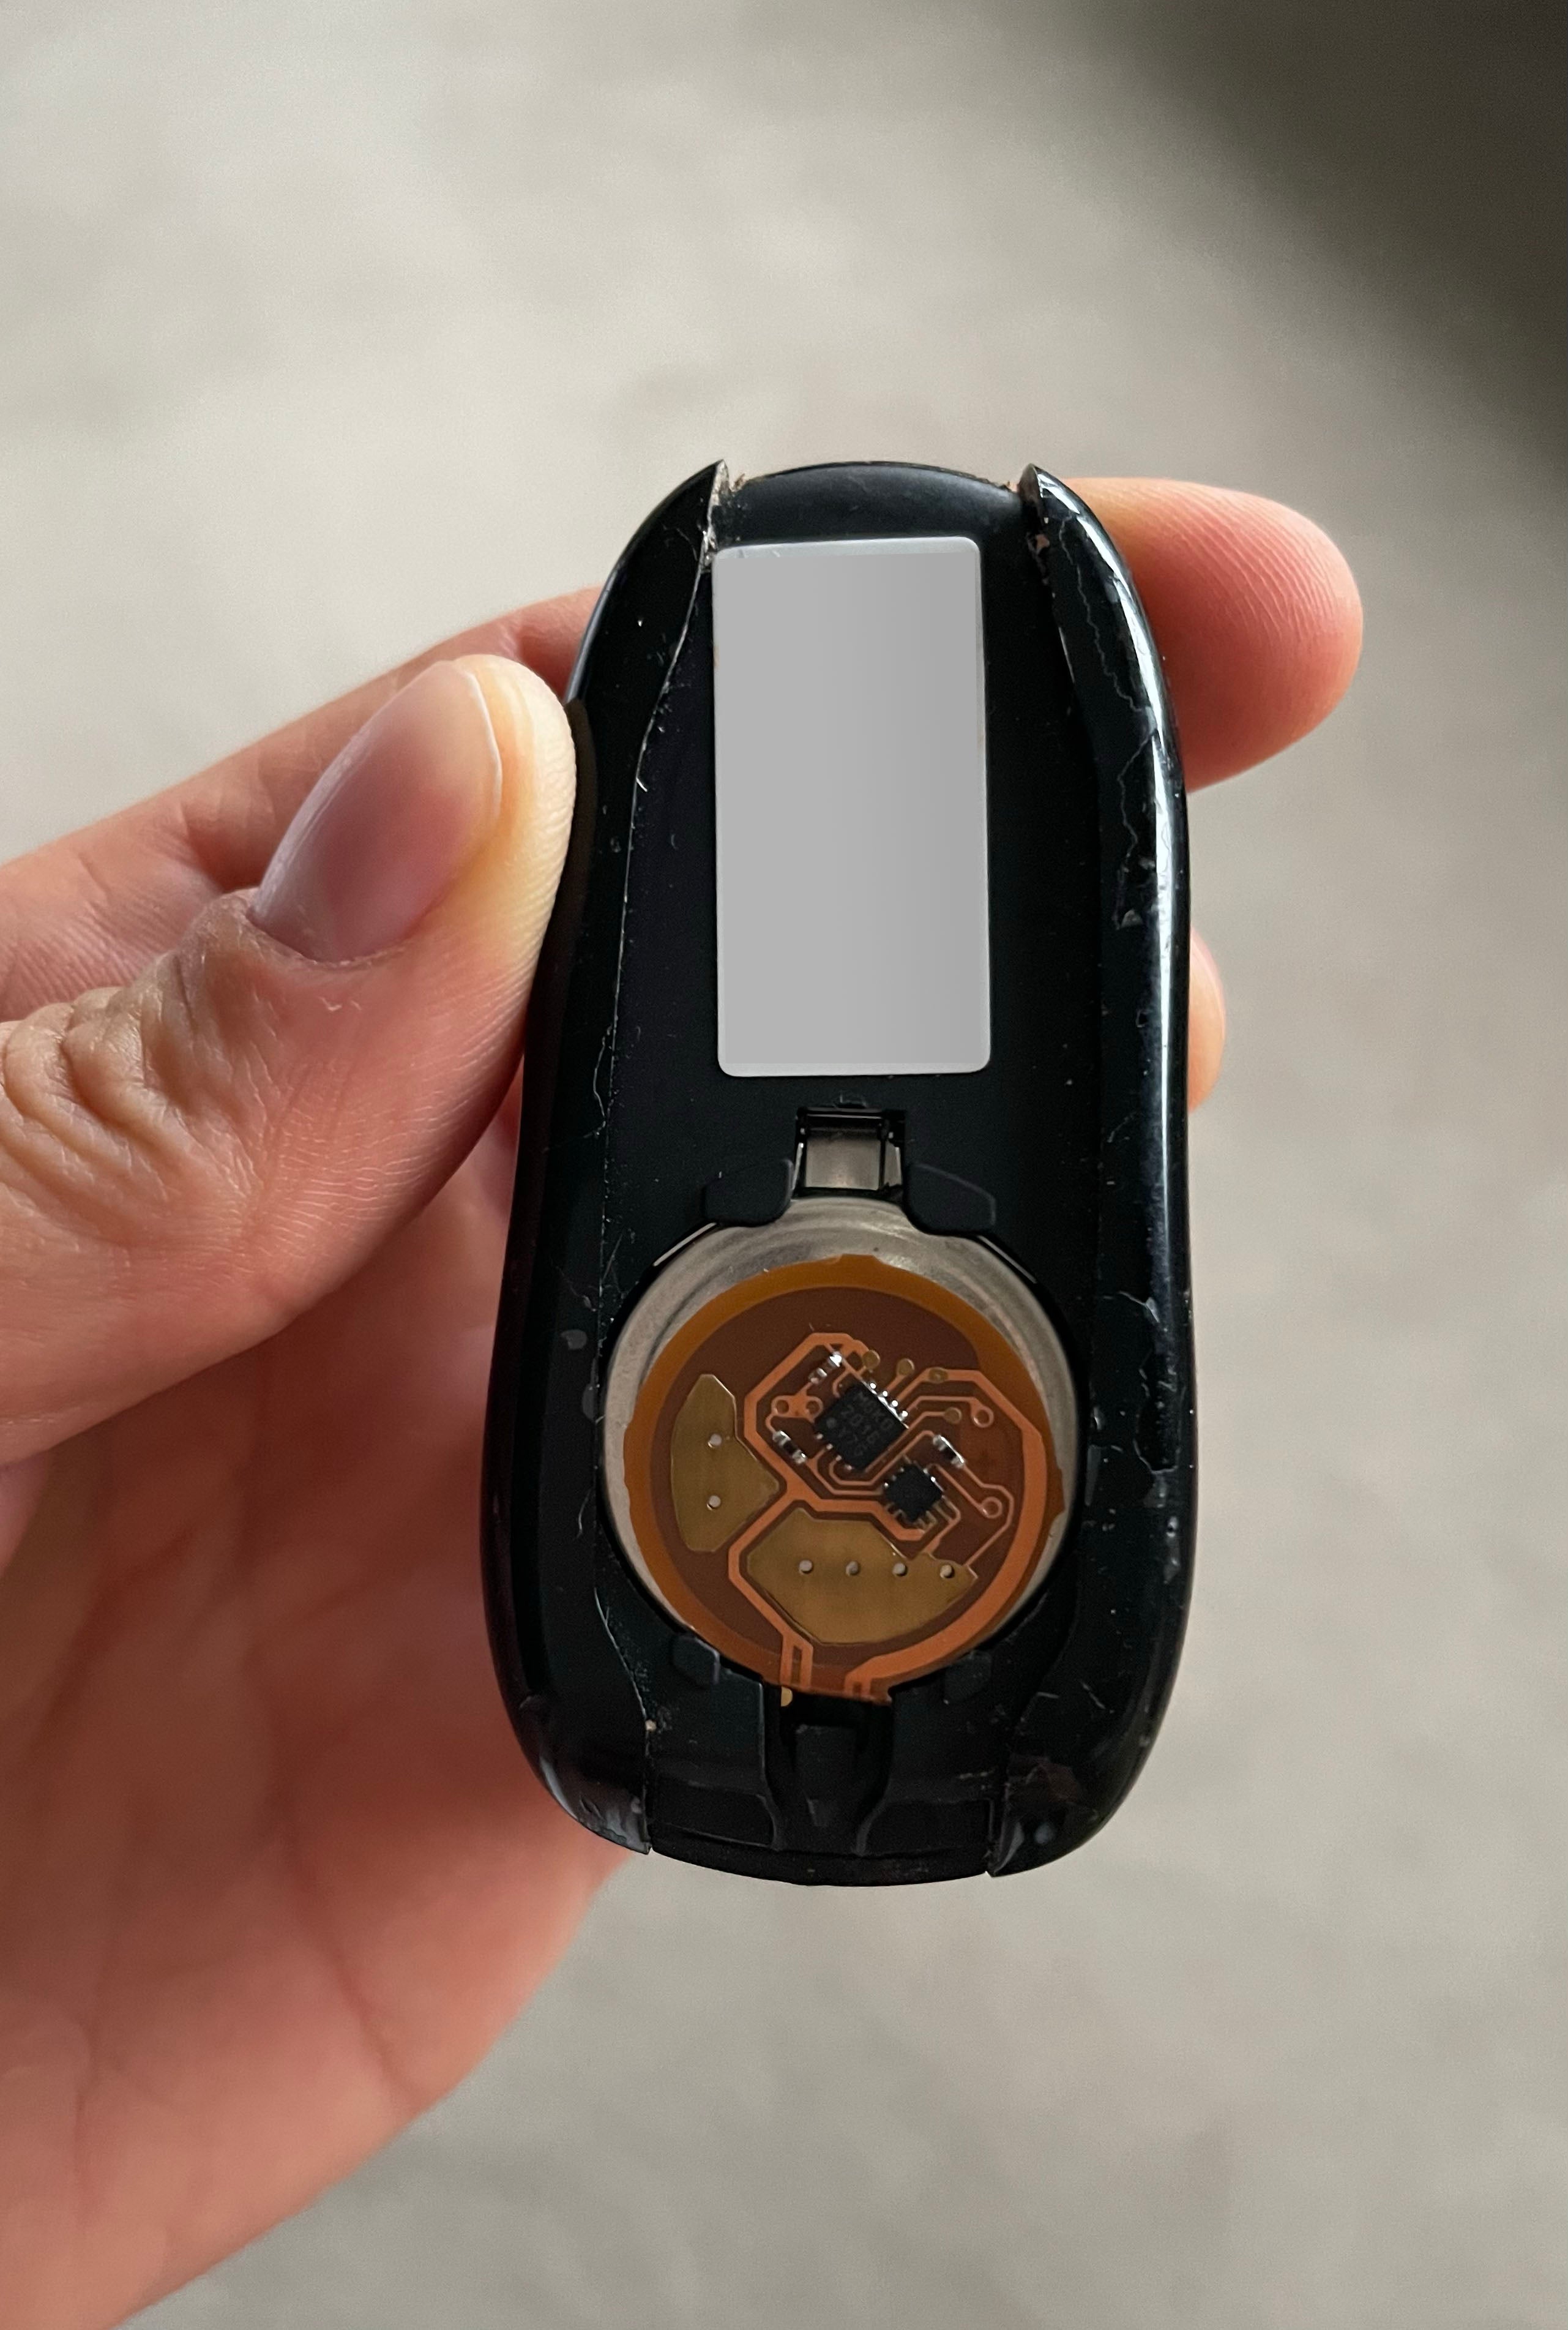 Tesla car key with KEYSHIELD anti-theft security sleeve installed to prevent car theft